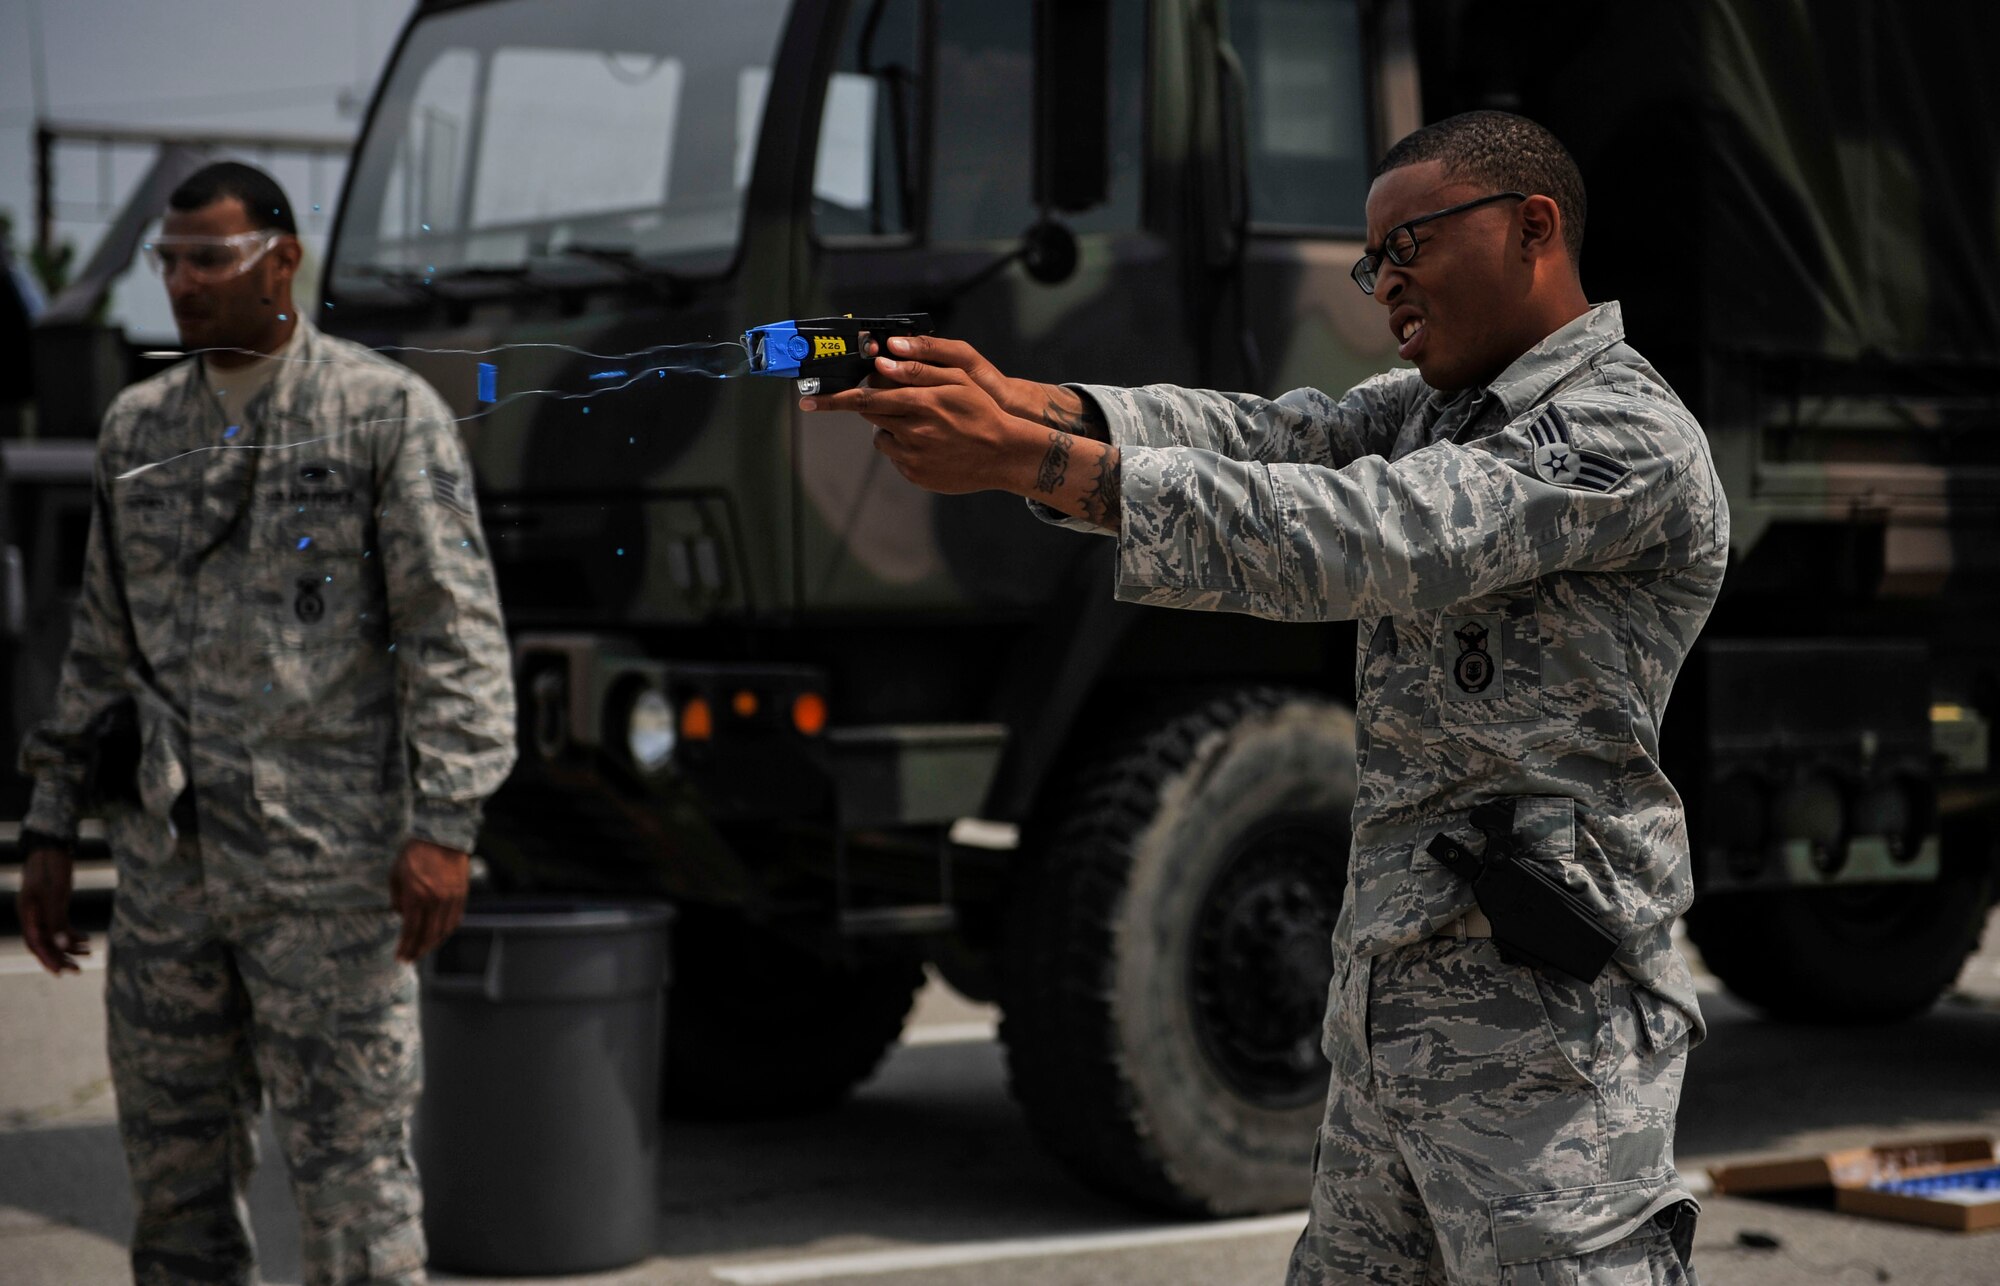 Senior Airman Marcus Thomas, 51st Security Forces Squadron entry controller, fires a Taser during training on Osan Air Base, Republic of Korea, June 27, 2014. The Taser fires two small dart-like electrodes which stay connected to the main unit by conductive wire while being propelled by small compressed nitrogen charges. (U.S. Air Force photo/Senior Airman David Owsianka)